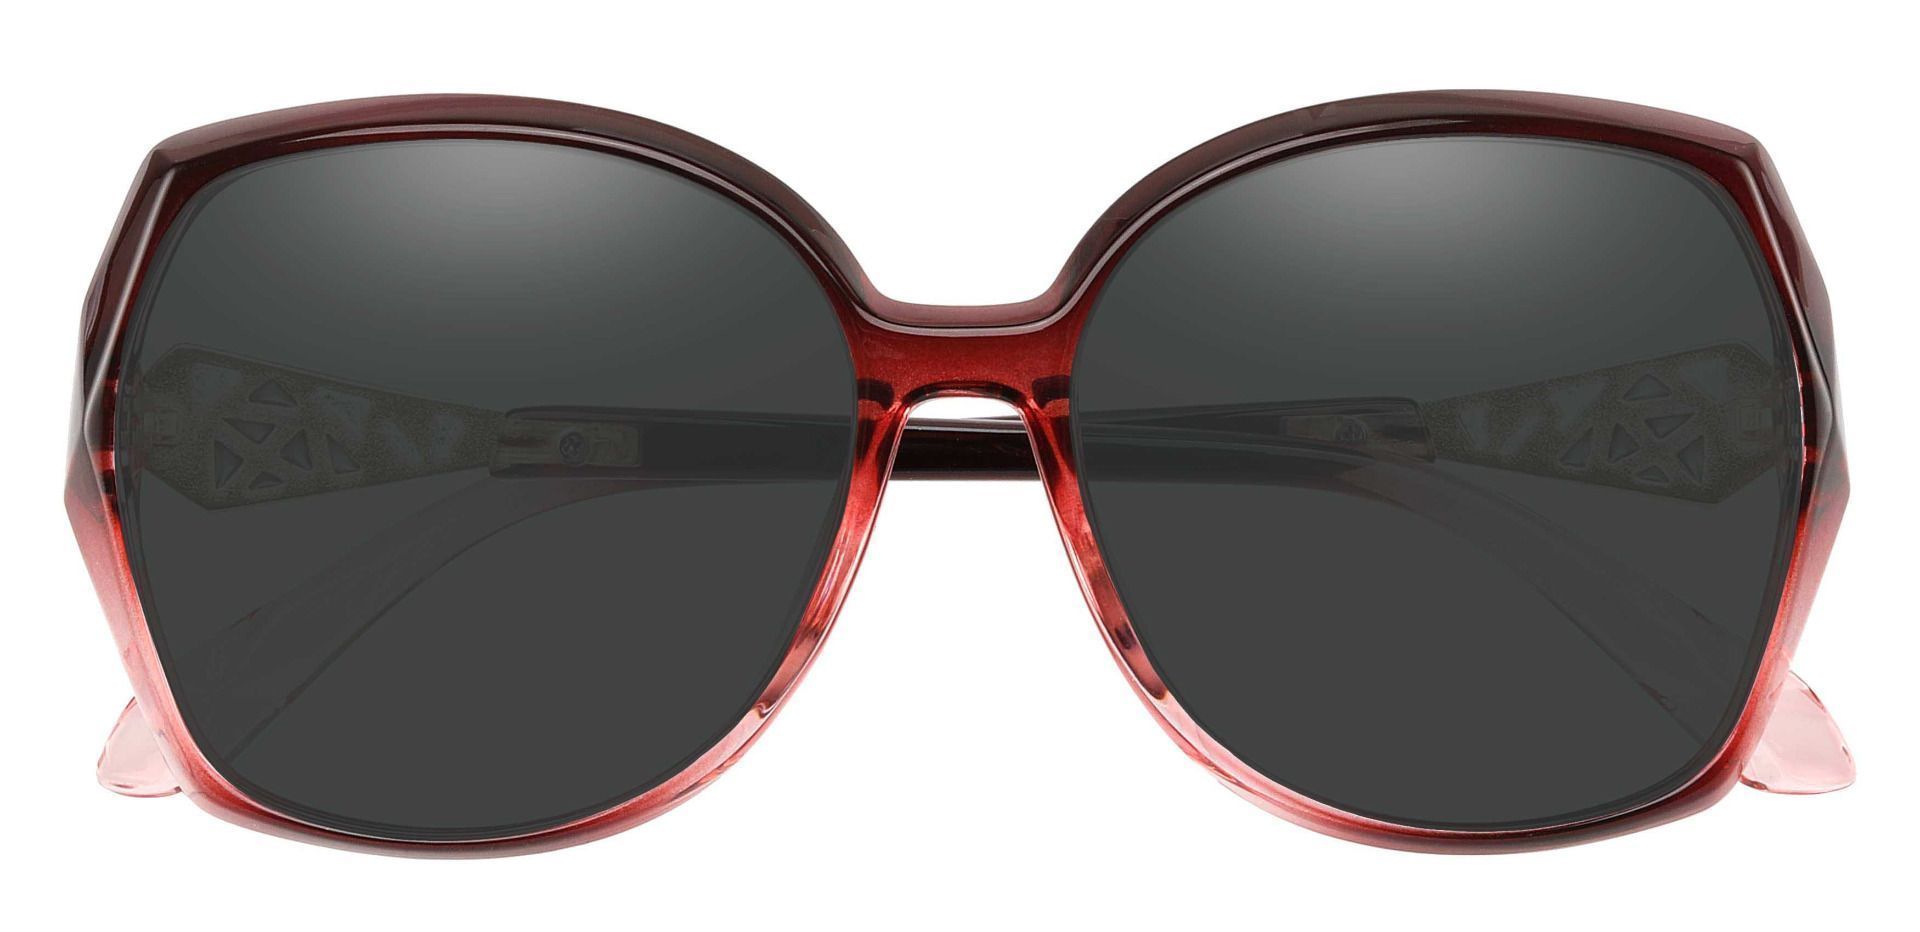 Swan Geometric Non-Rx Sunglasses - Red Frame With Gray Lenses